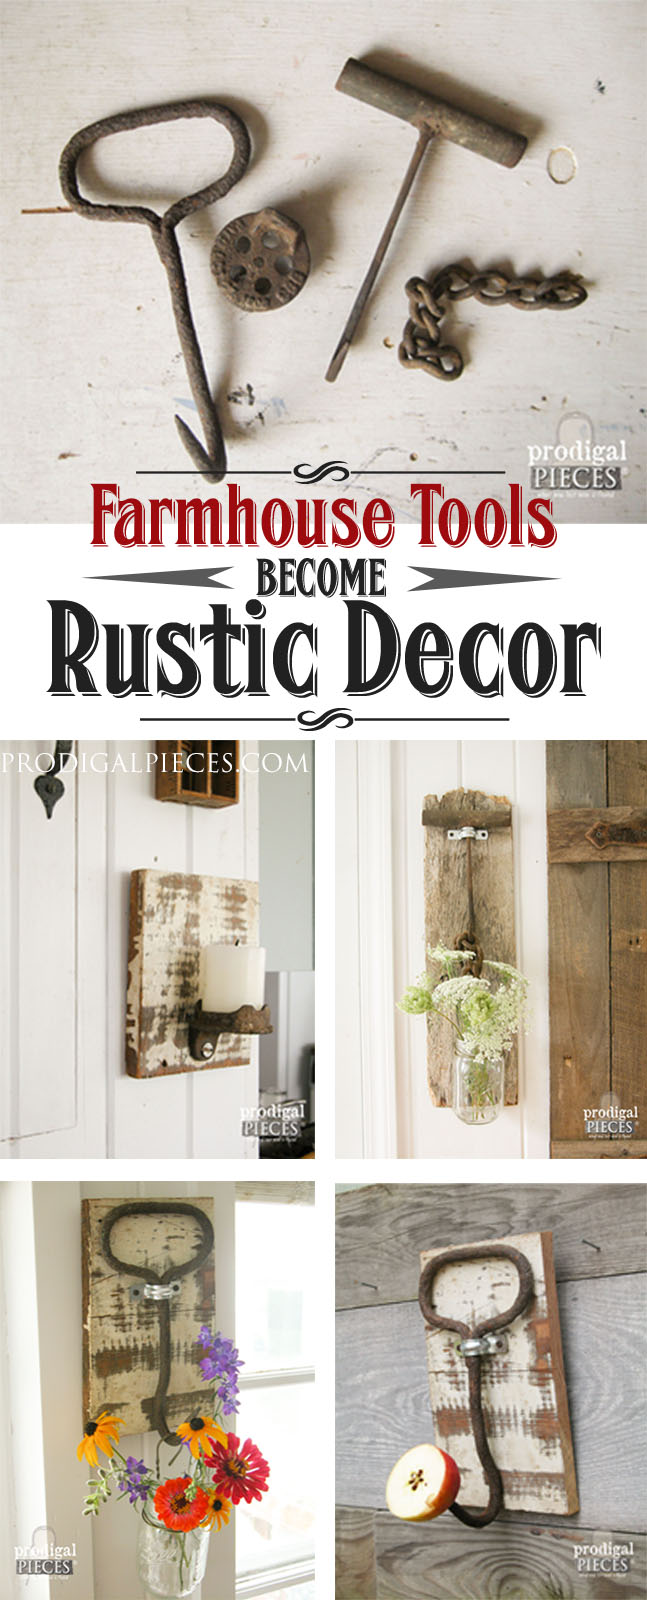 Old Farmhouse Tools Repurposed as Rustic Decor by Prodigal Pieces | prodigalpieces.com